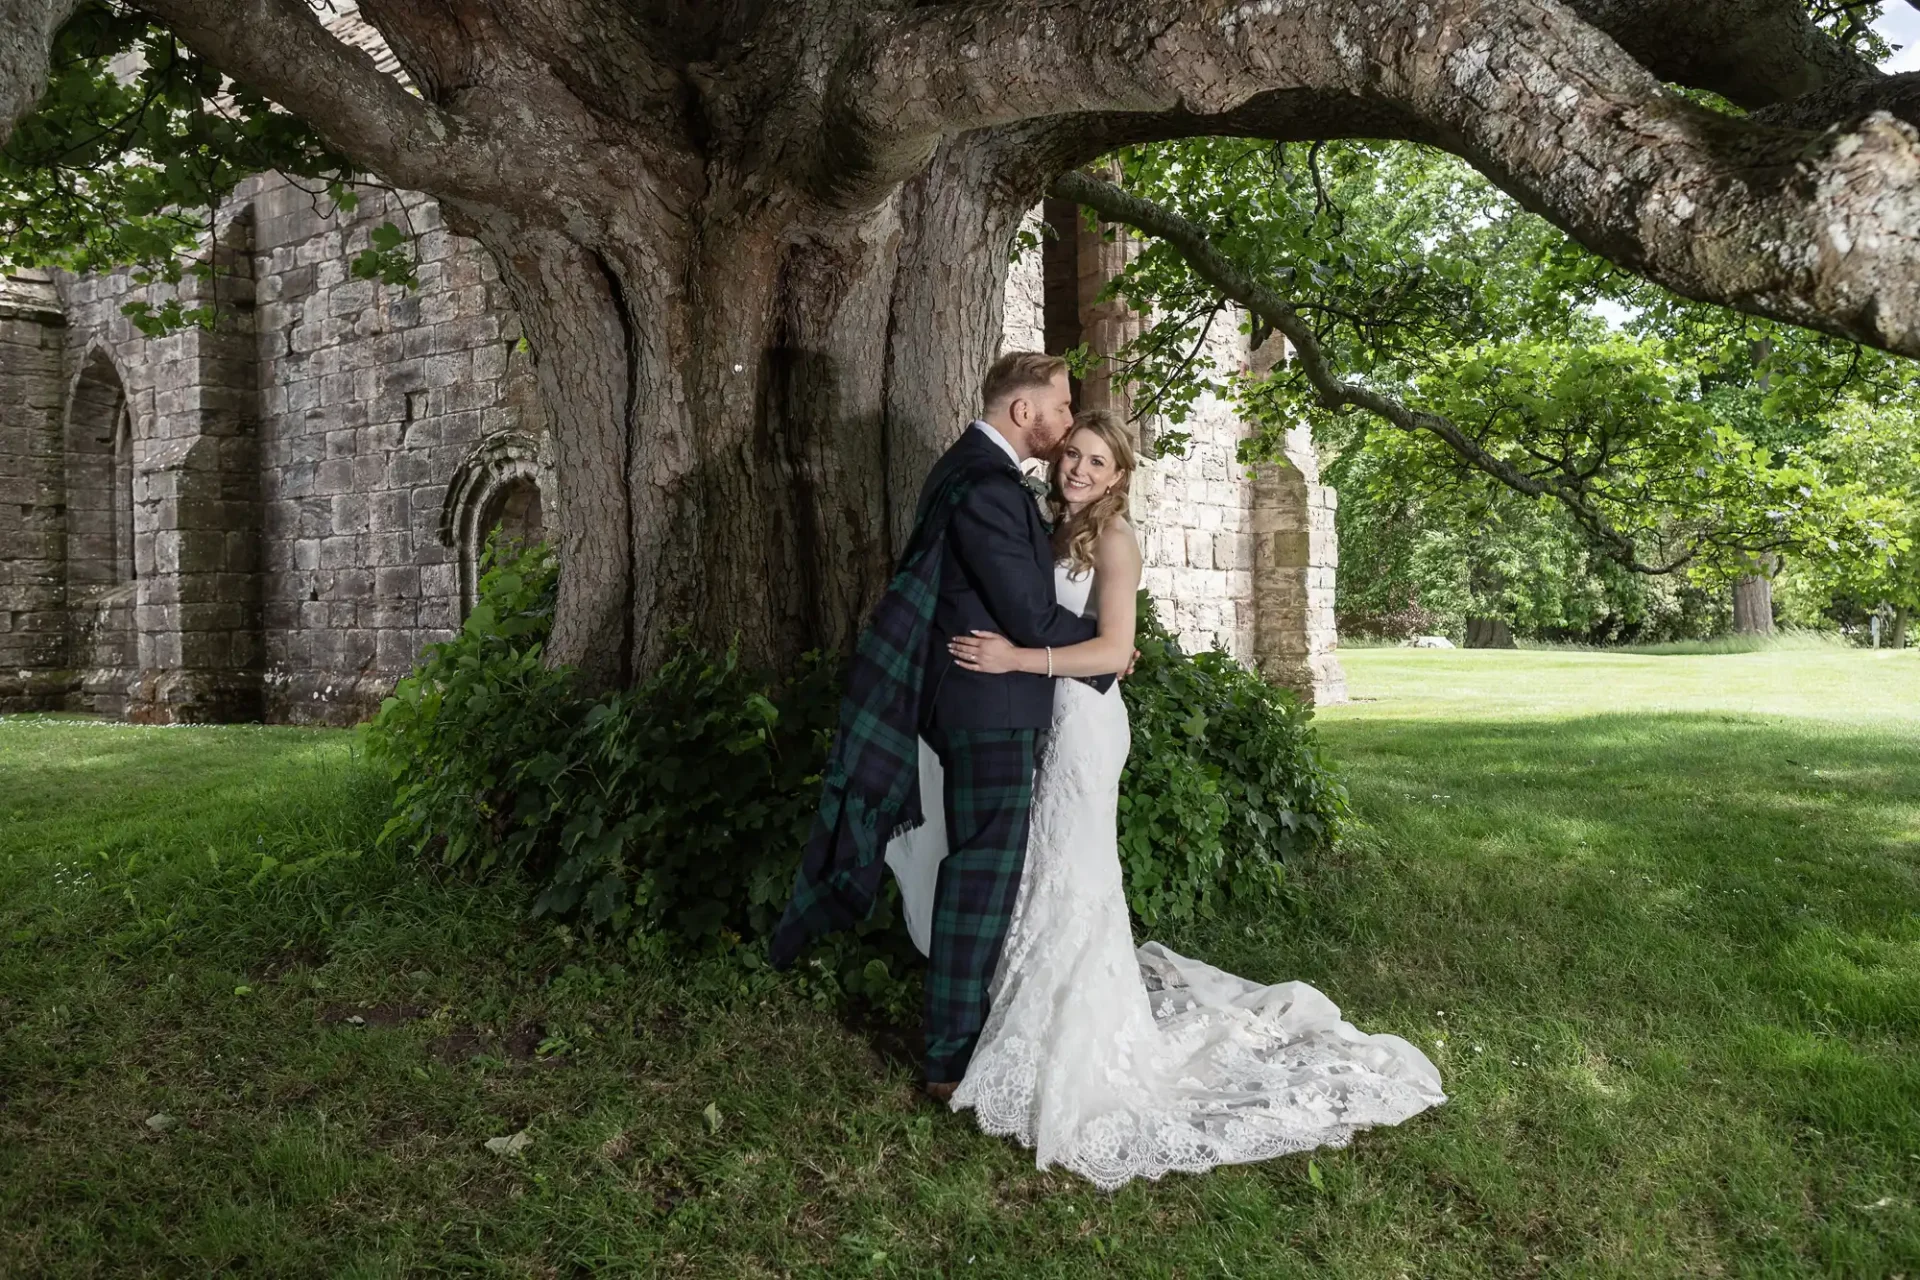 A bride and groom embracing under an ancient tree, with the groom wearing a tartan kilt and the bride in a lace gown, near old stone ruins in a lush green setting.